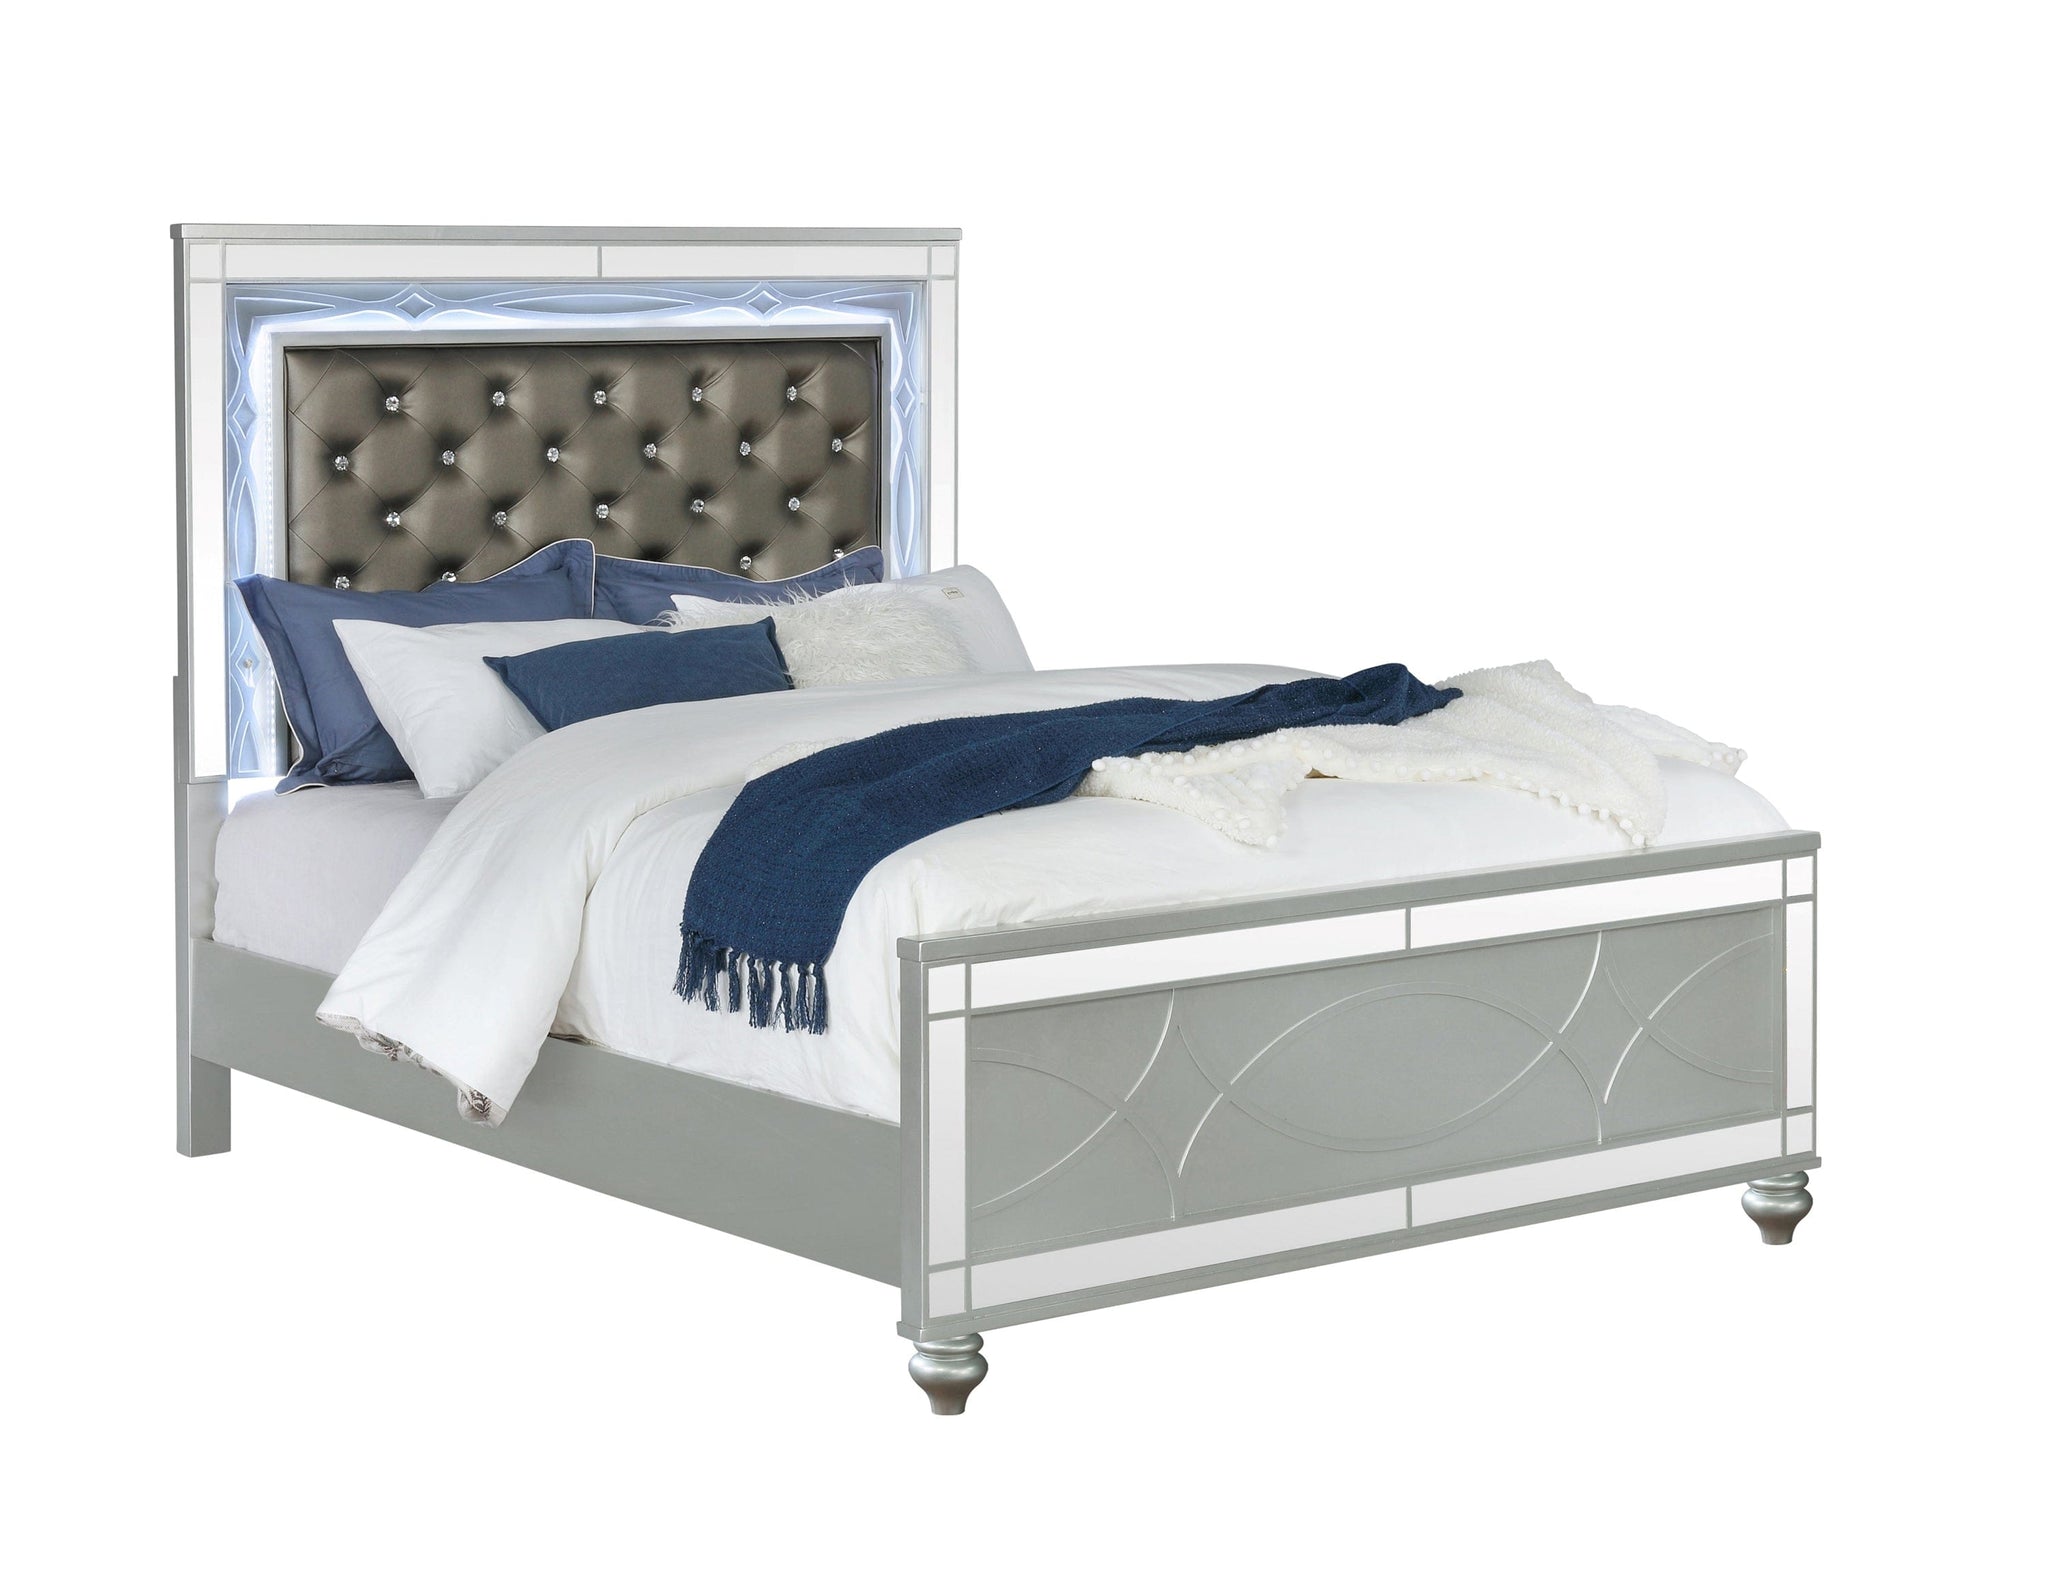 Gunnison Queen Panel Bed With LED Lighting Silver Metallic, This Glamorous Contemporary Bed Features A Variety Of Features That Make It A Must Have In Any Modern Home. SKU: 223211Q